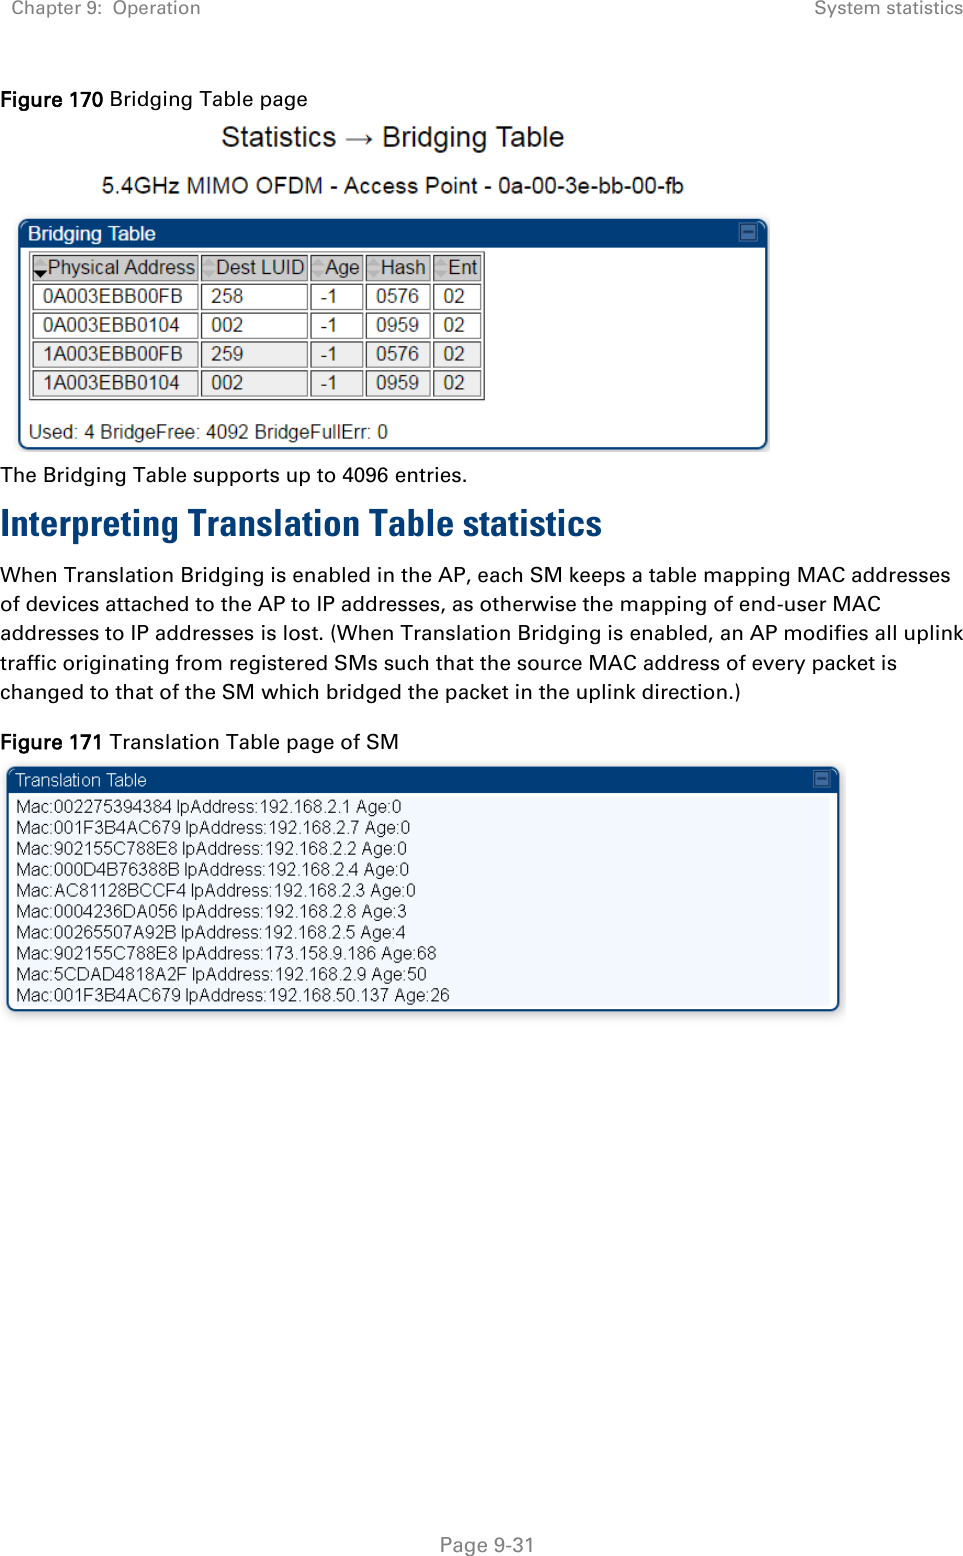 Chapter 9:  Operation System statistics   Page 9-31 Figure 170 Bridging Table page    The Bridging Table supports up to 4096 entries. Interpreting Translation Table statistics When Translation Bridging is enabled in the AP, each SM keeps a table mapping MAC addresses of devices attached to the AP to IP addresses, as otherwise the mapping of end-user MAC addresses to IP addresses is lost. (When Translation Bridging is enabled, an AP modifies all uplink traffic originating from registered SMs such that the source MAC address of every packet is changed to that of the SM which bridged the packet in the uplink direction.) Figure 171 Translation Table page of SM  